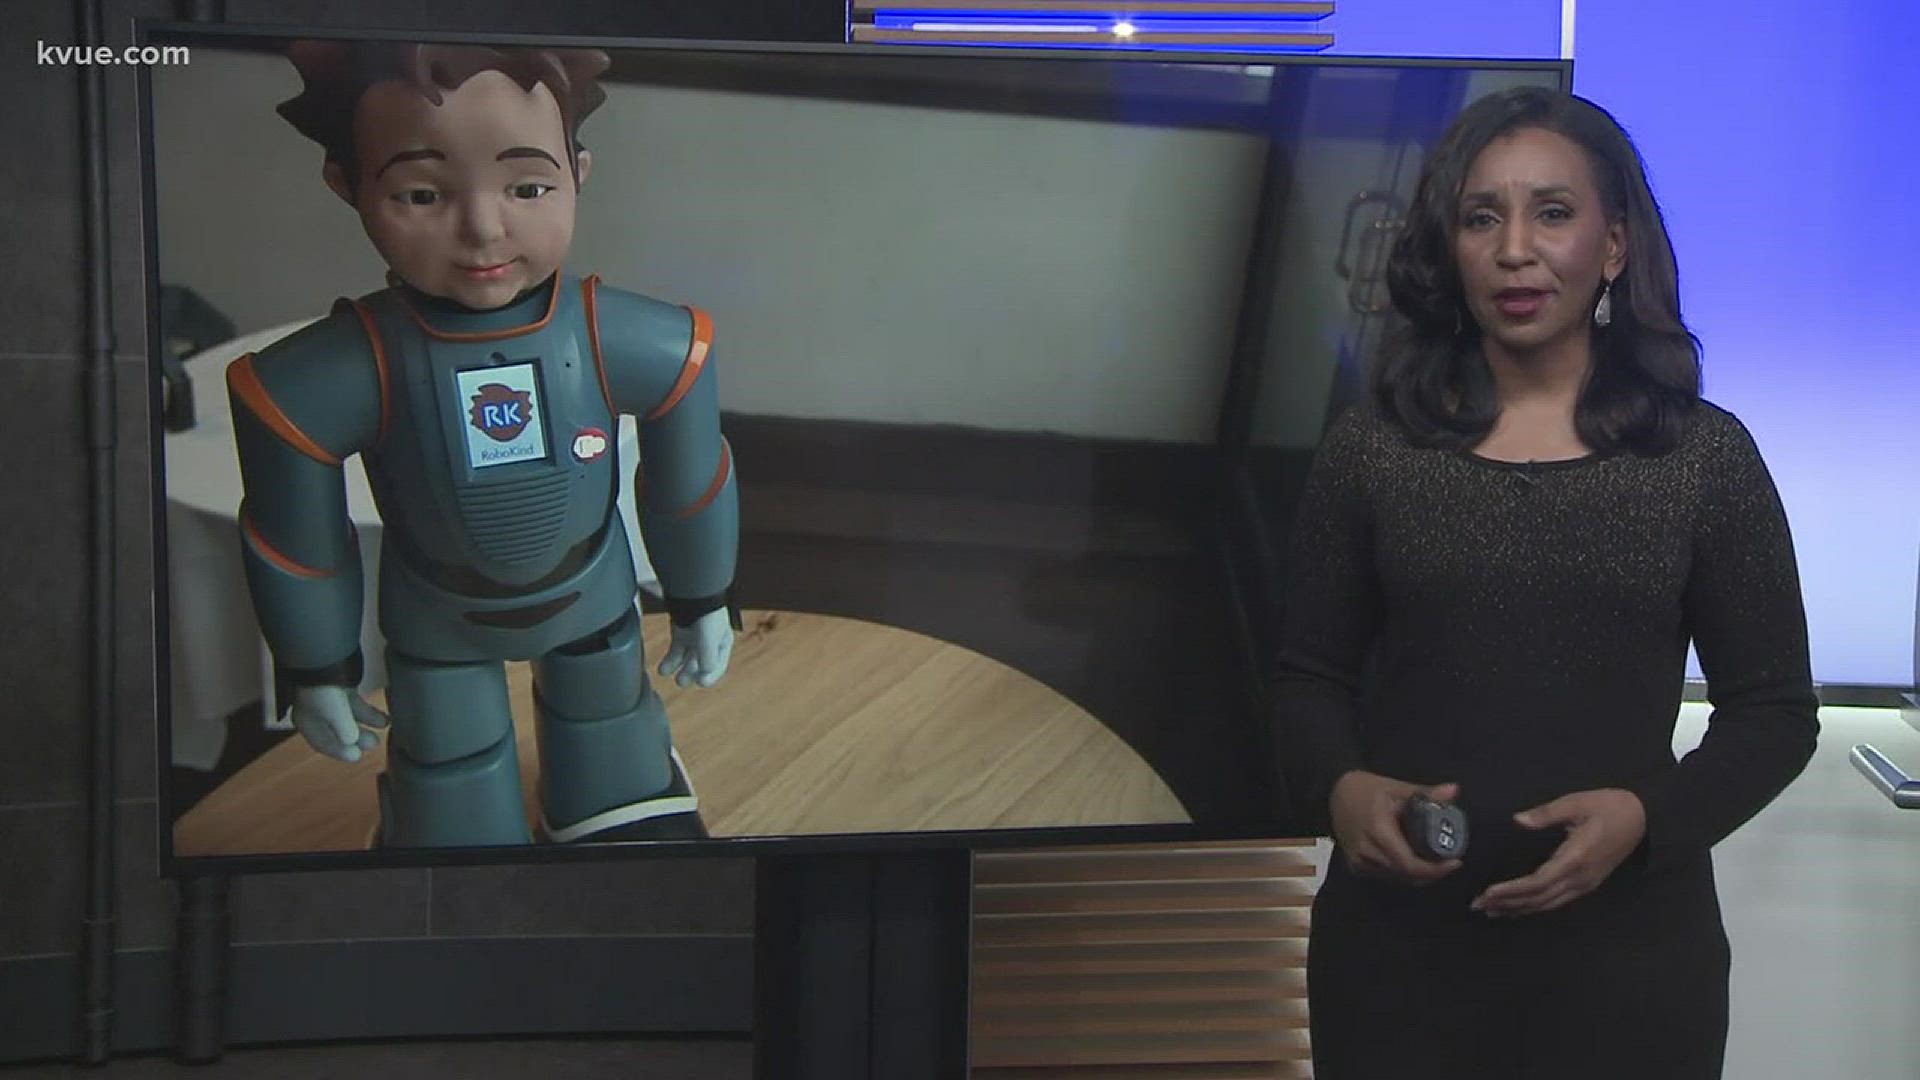 At Elgin ISD, a high tech robot named Milo is helping students with autism by working to transform how they interact with others.